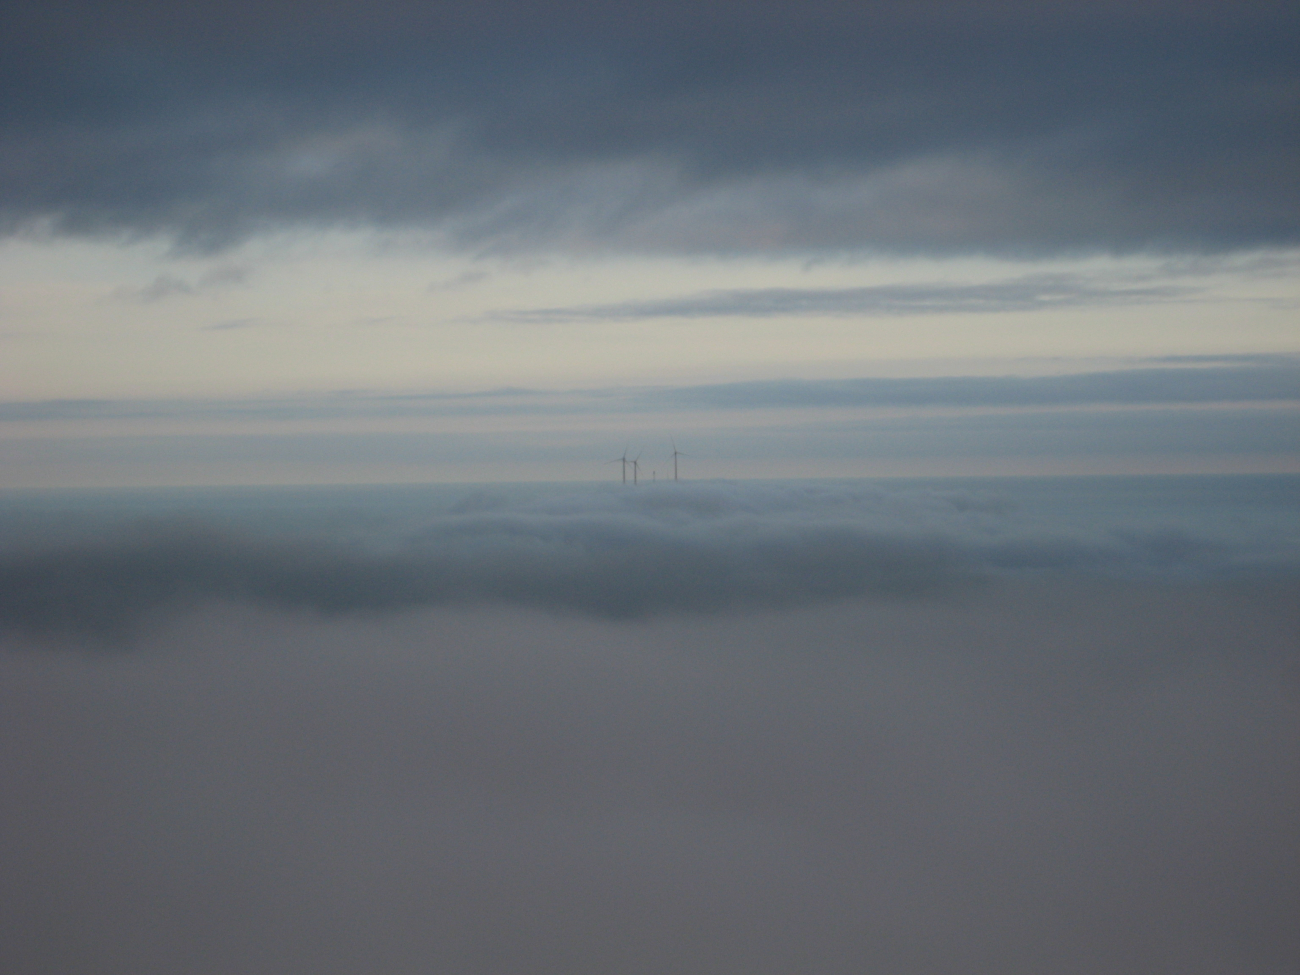 The windmills of Kodiak Island standing above the clouds